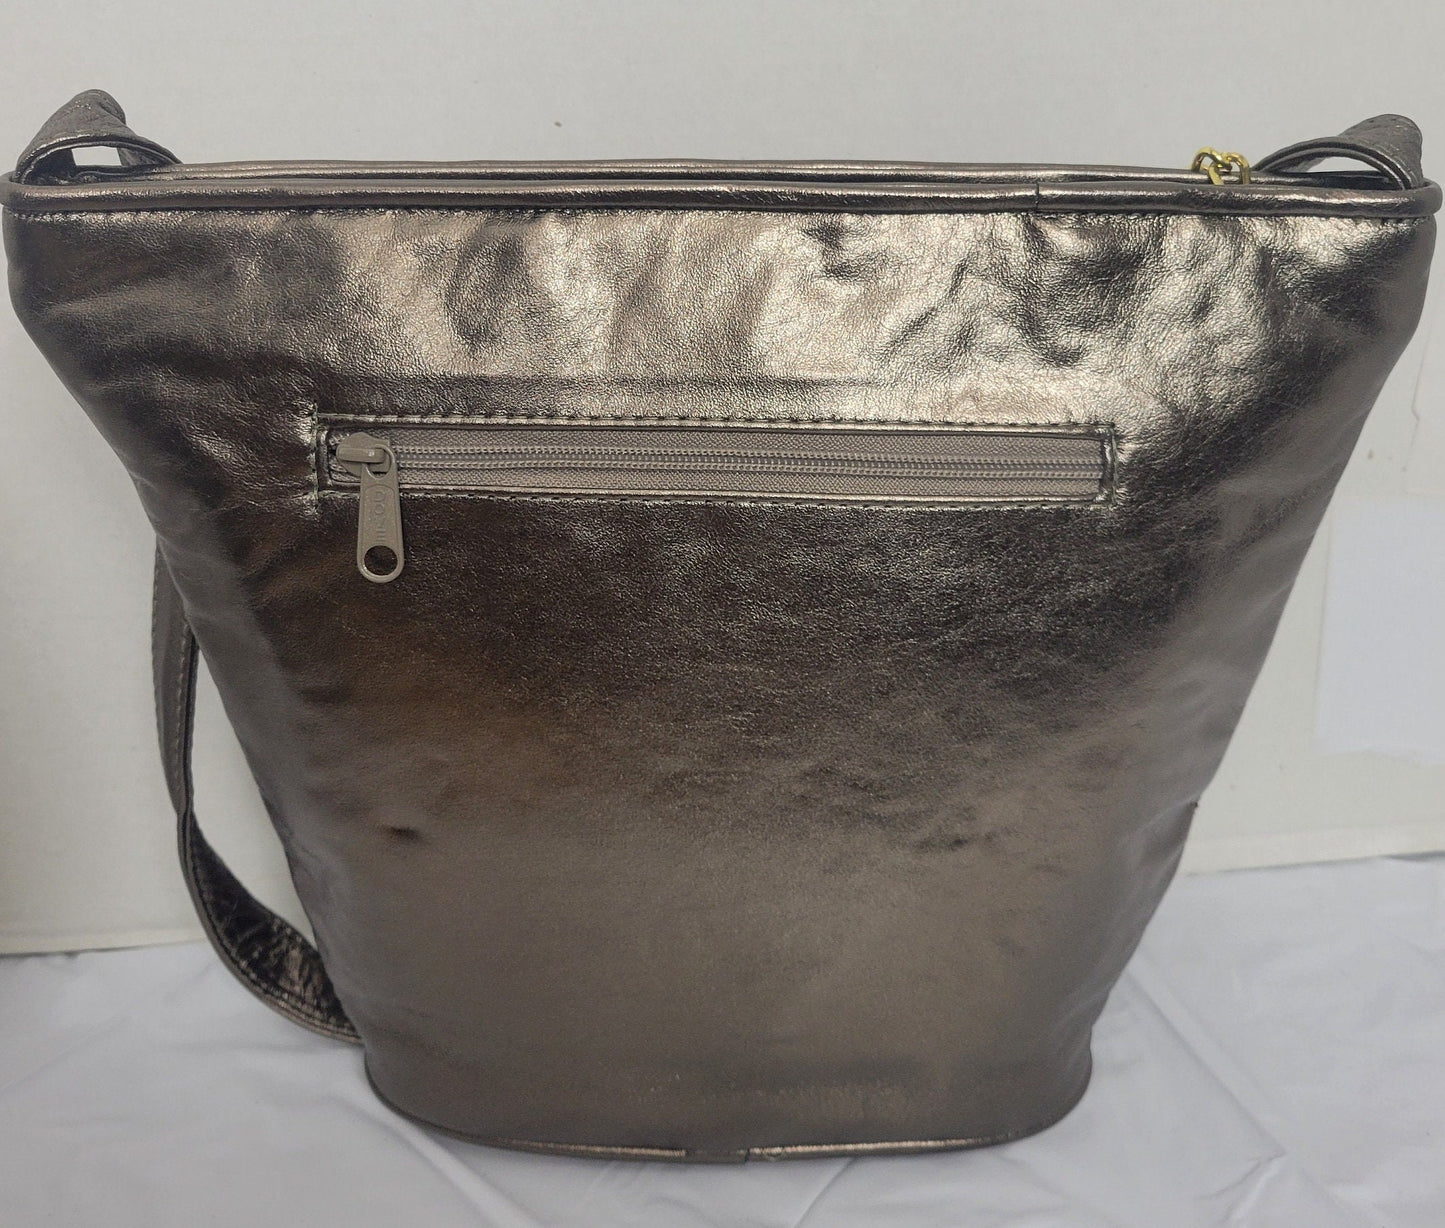 Pewter with pewter Zigzag design Leather Shoulder Handbag for women. Zigzag Design on front side only. Made In USA!